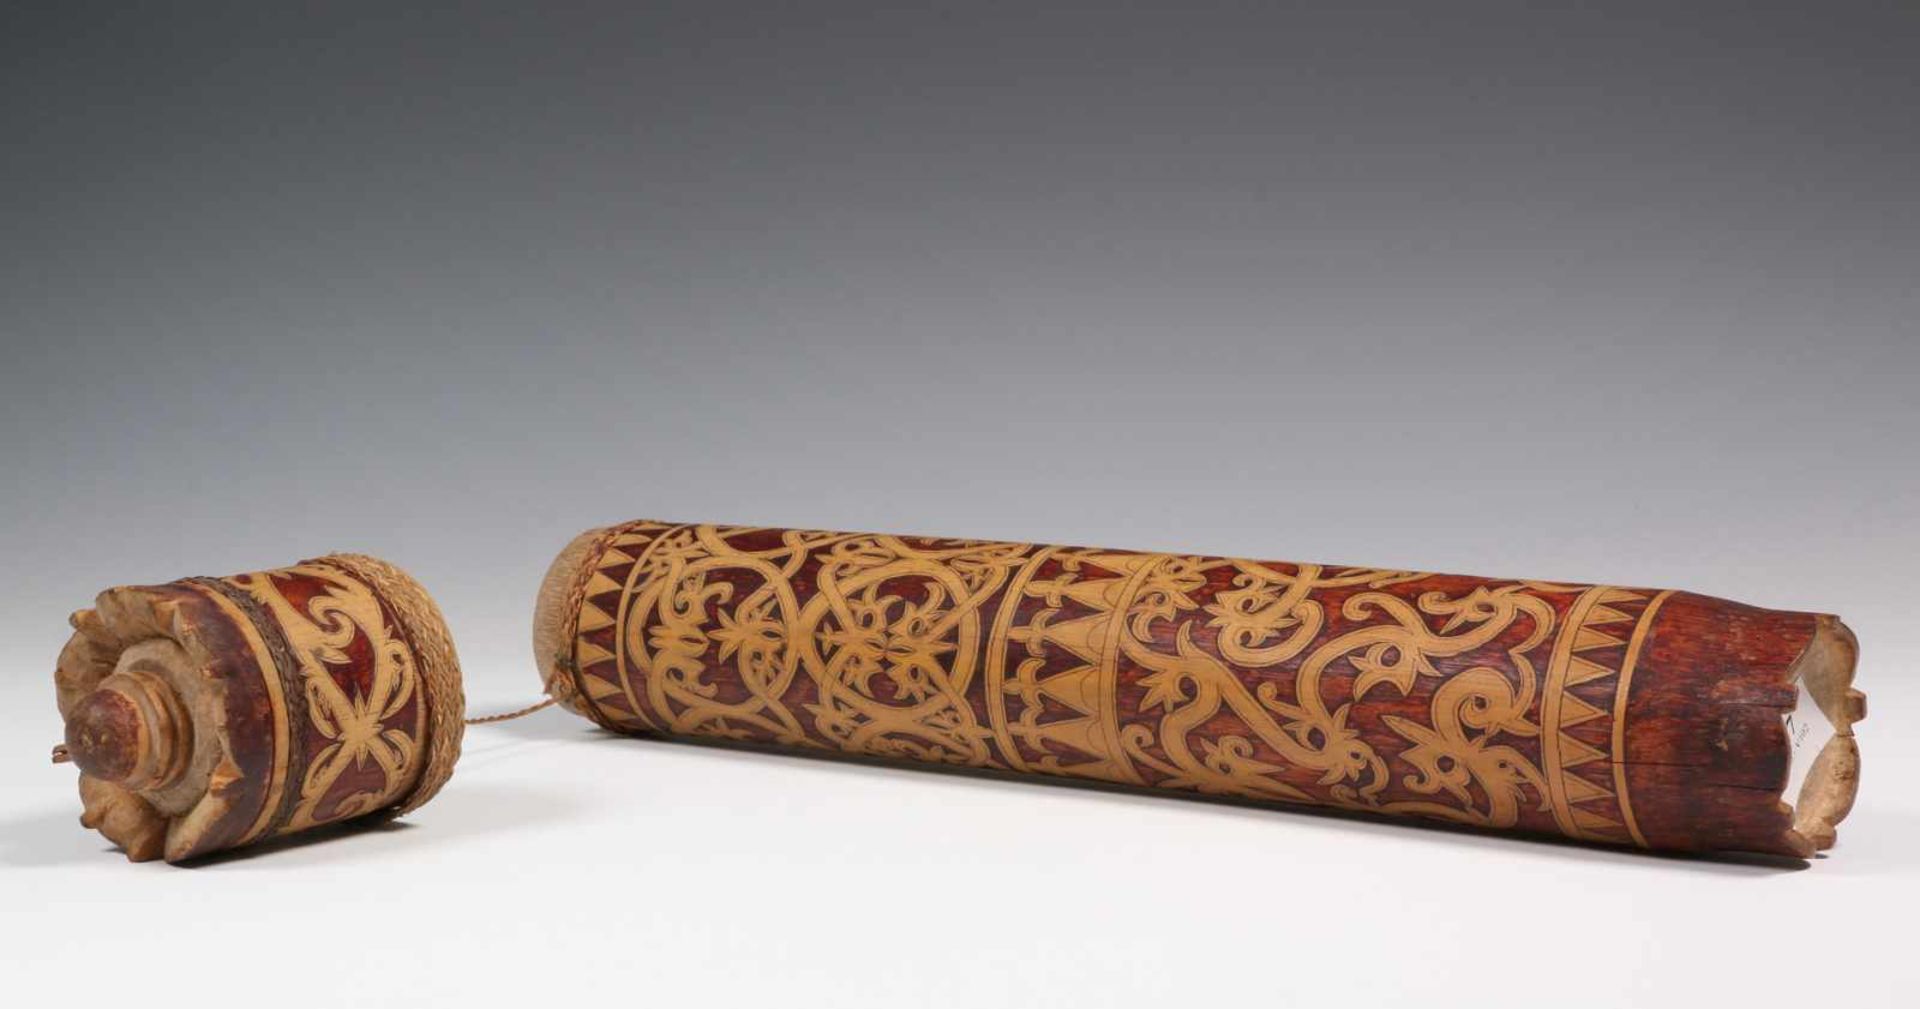 Borneo, Dayak, arrow containerwith finely carved floral patterns, h. 49 cm. [1]300